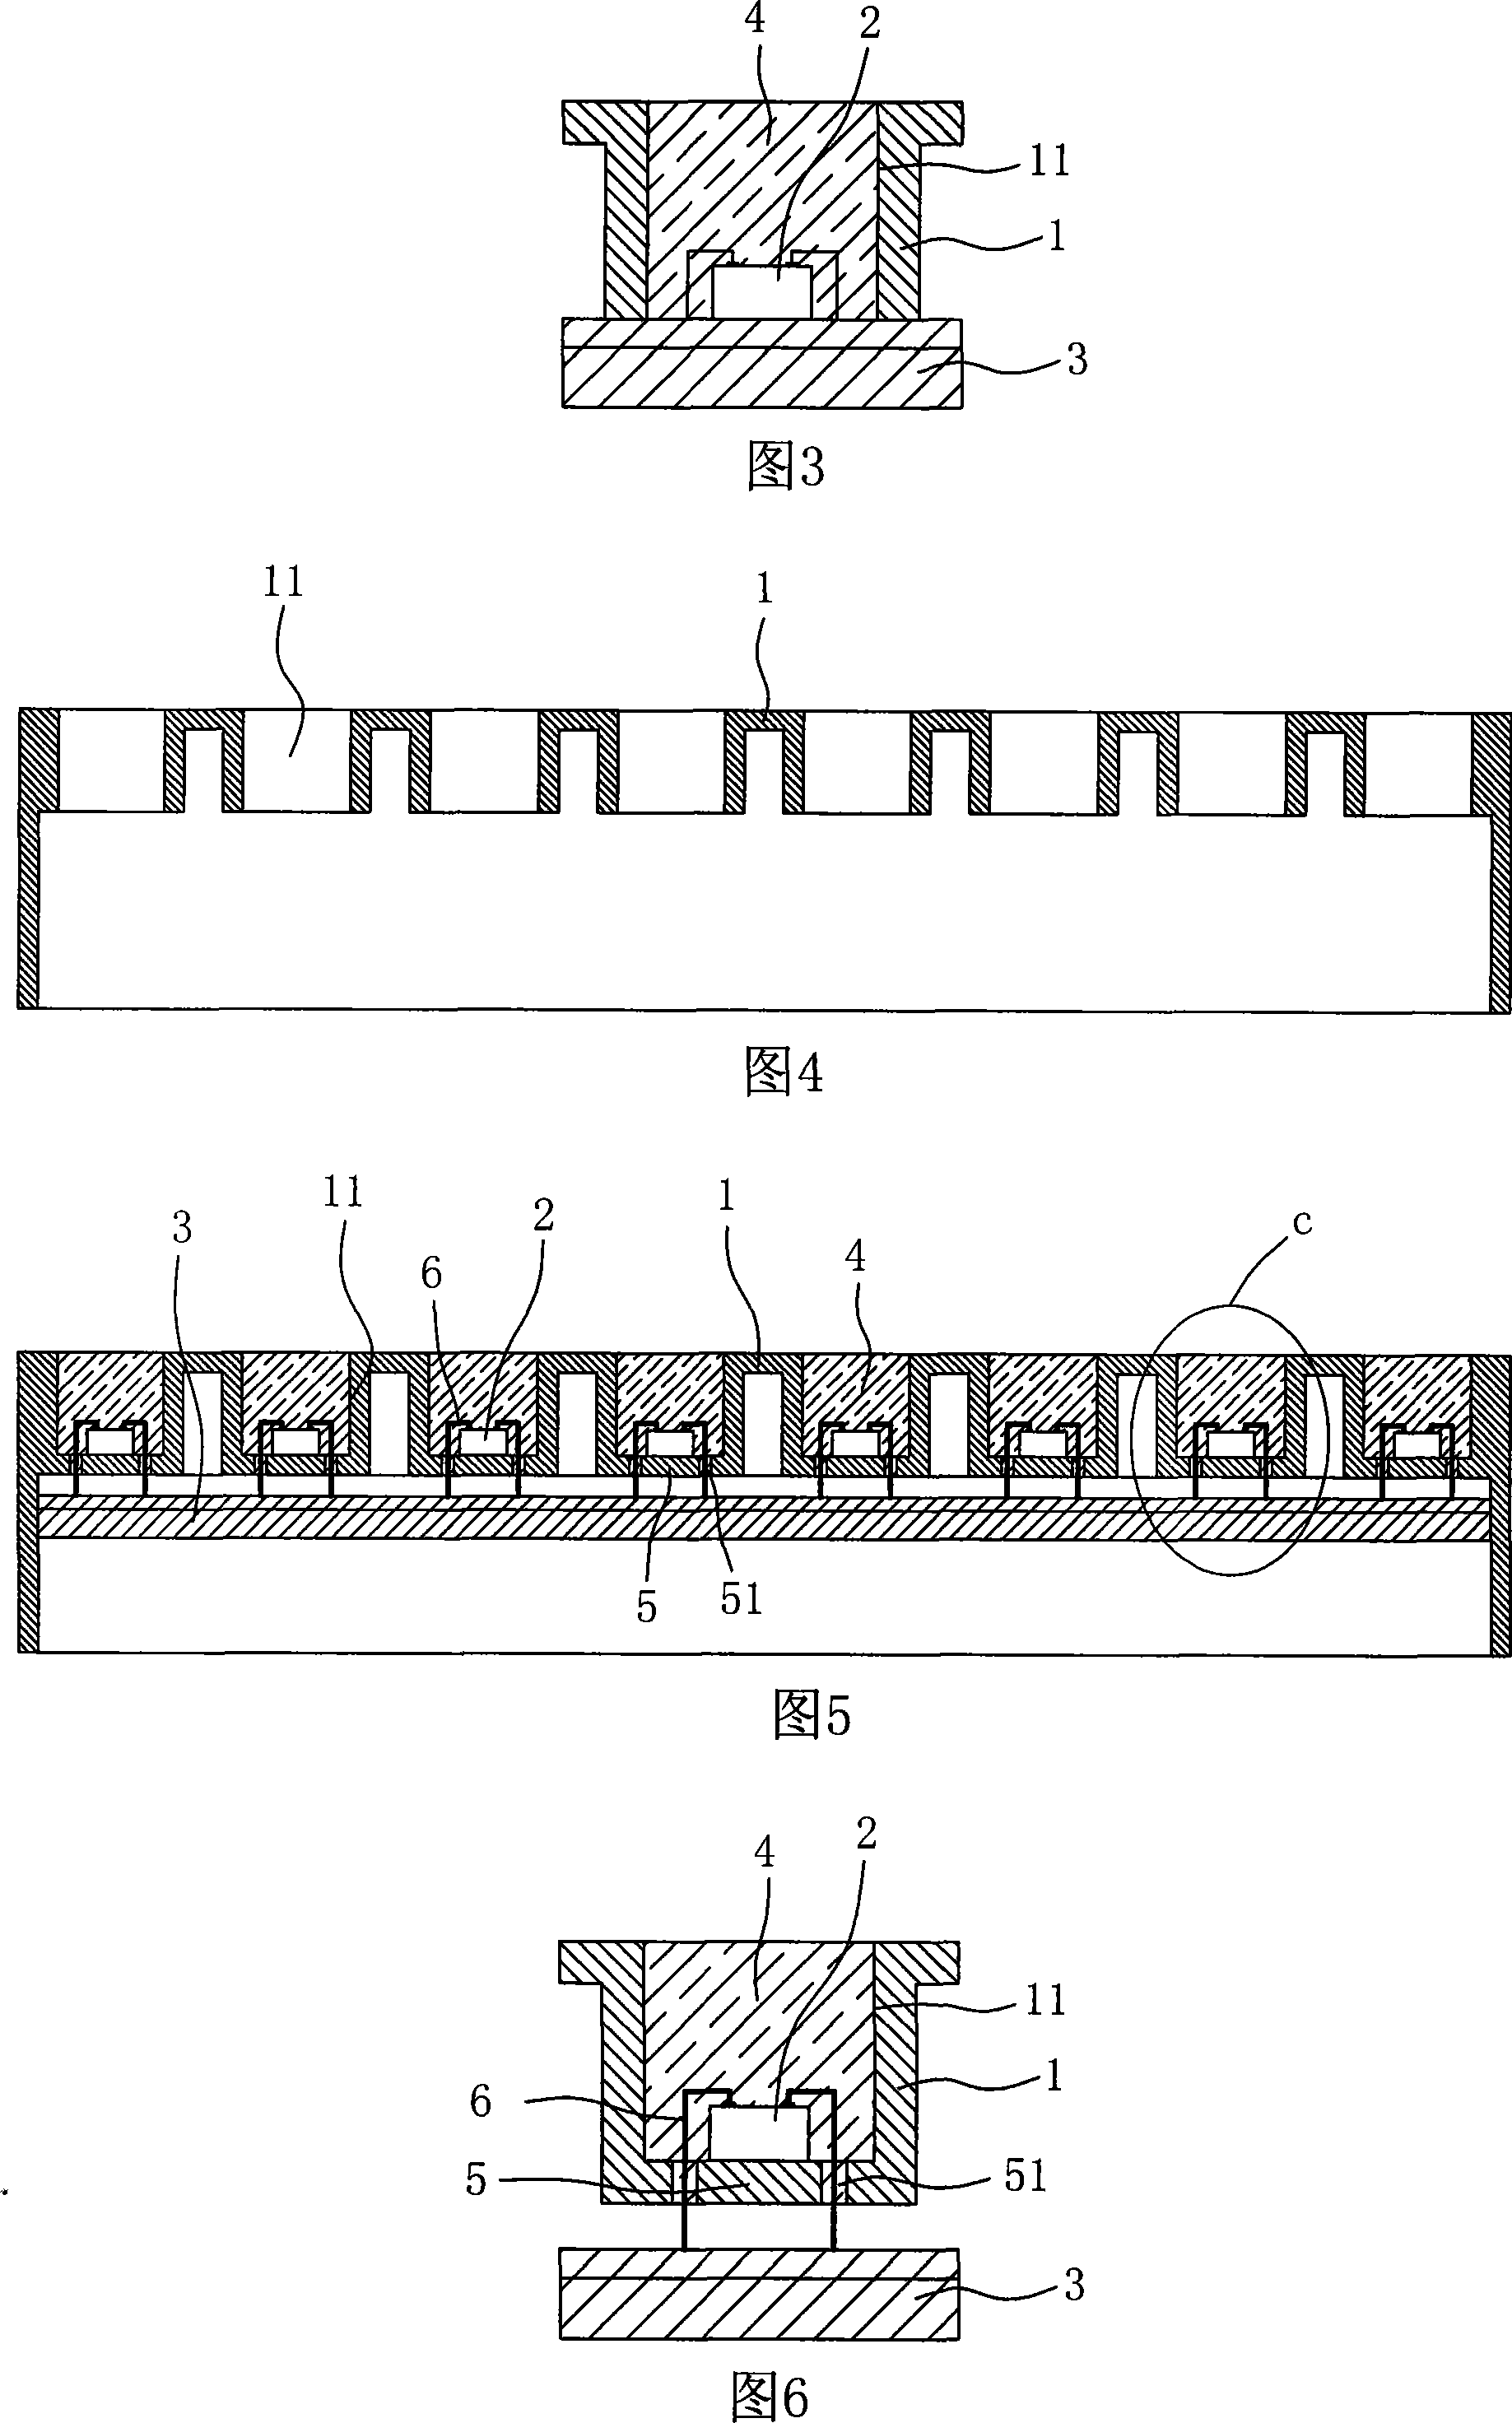 Encapsulation structure and high heat conducting reflexion cap of diode point matrix / nixie tube